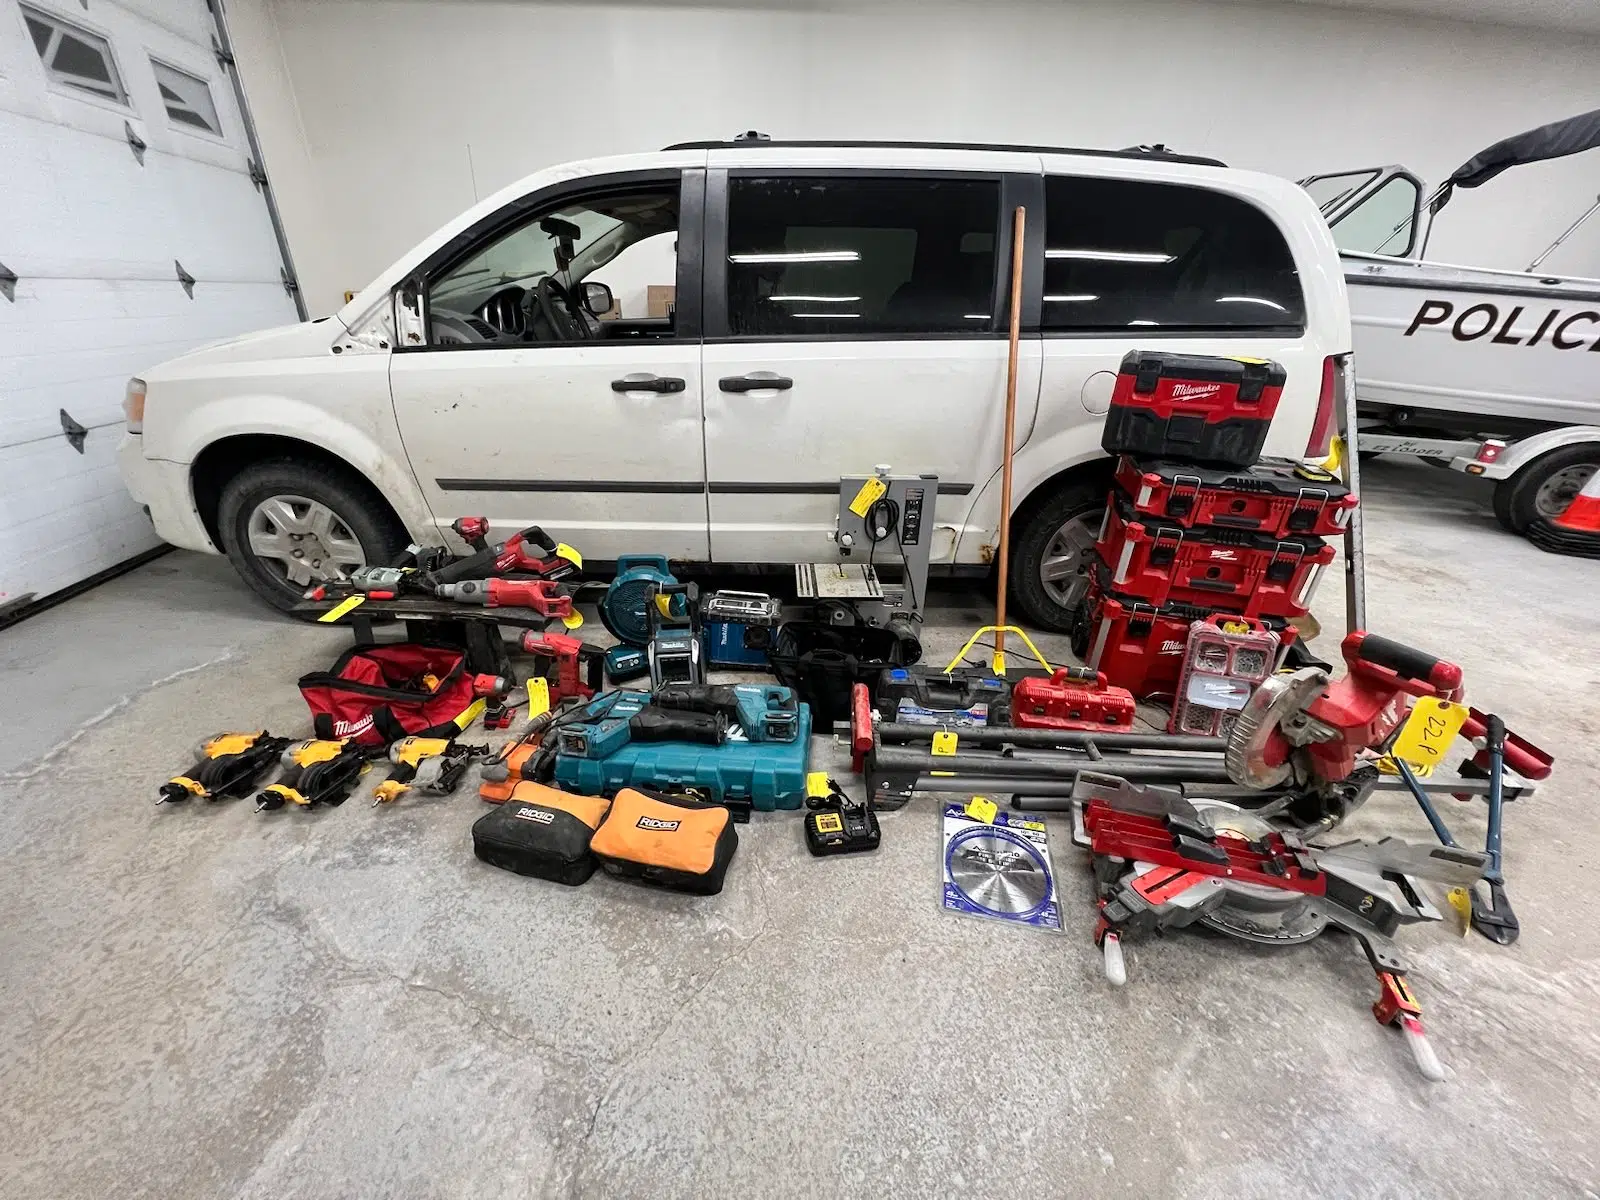 Three people charged after stolen tools recovered